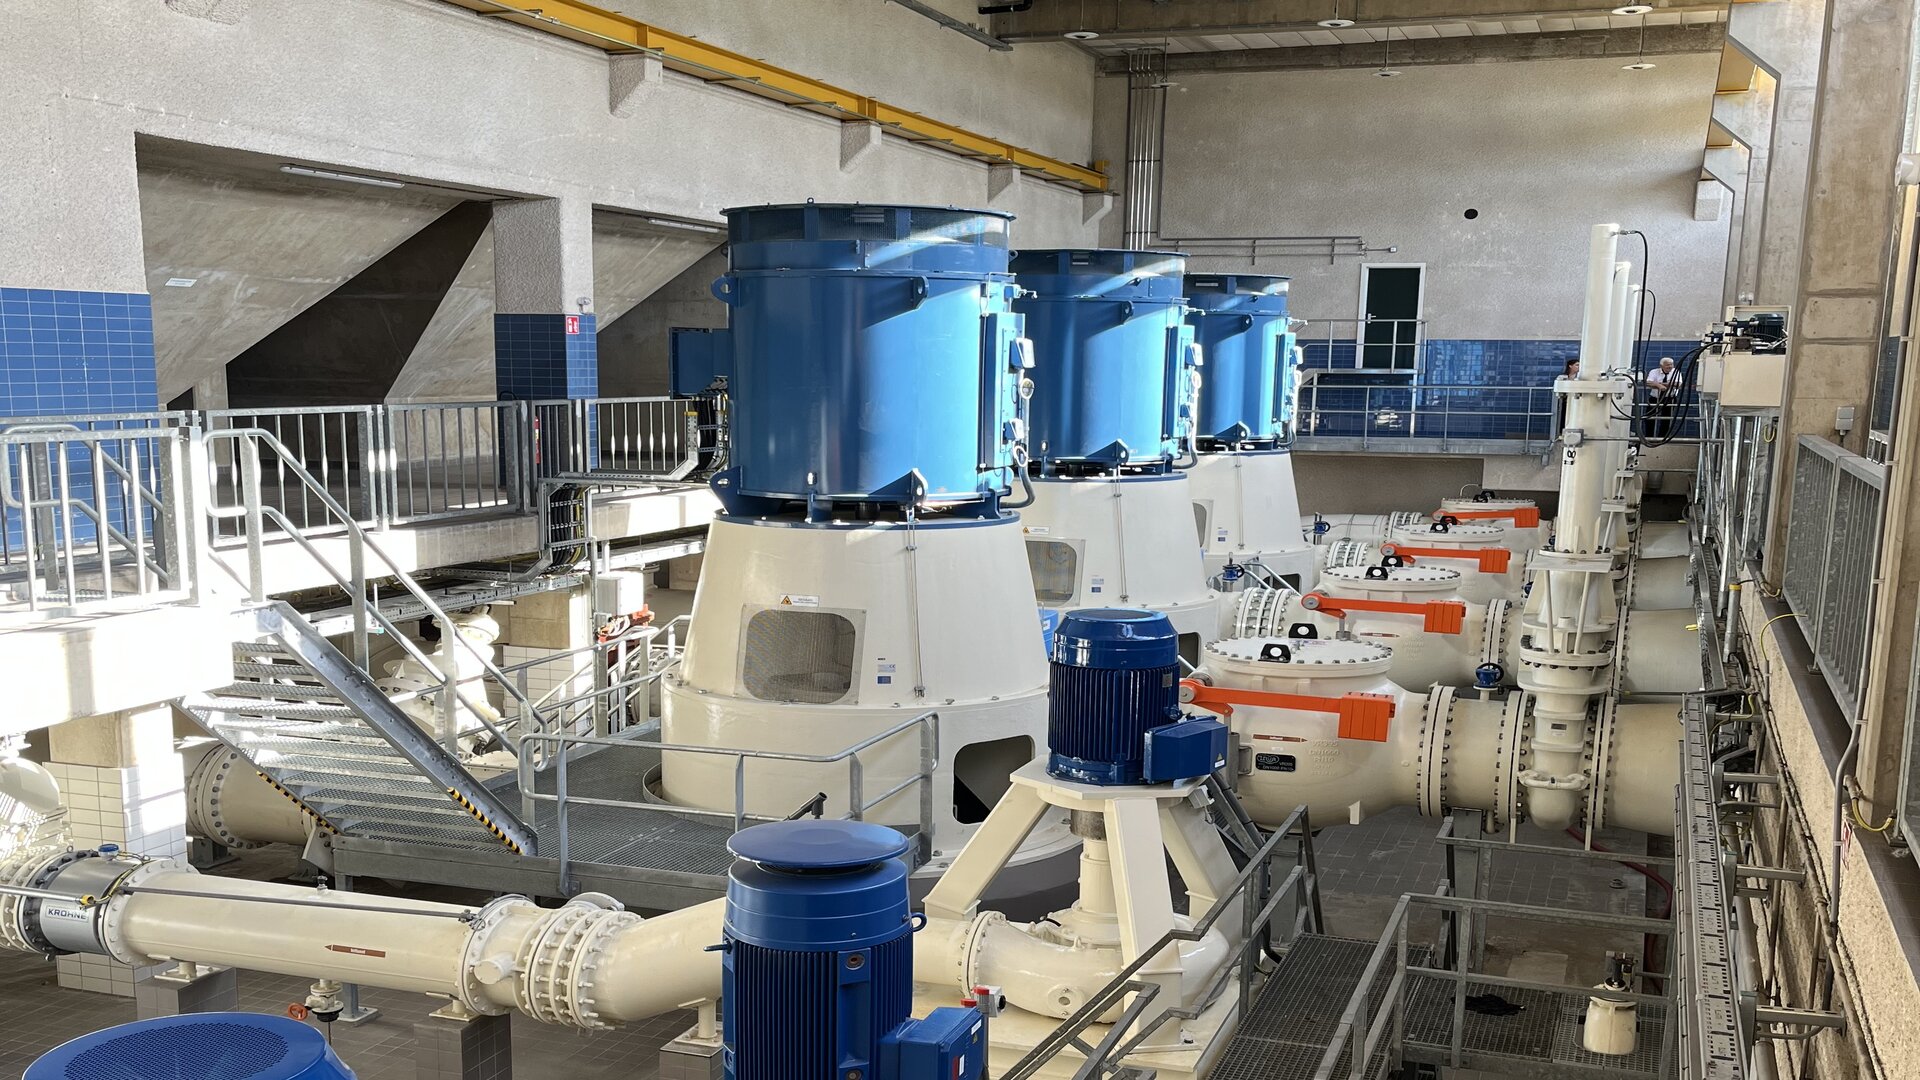 Pumping station for pumping water in wastewater treatment